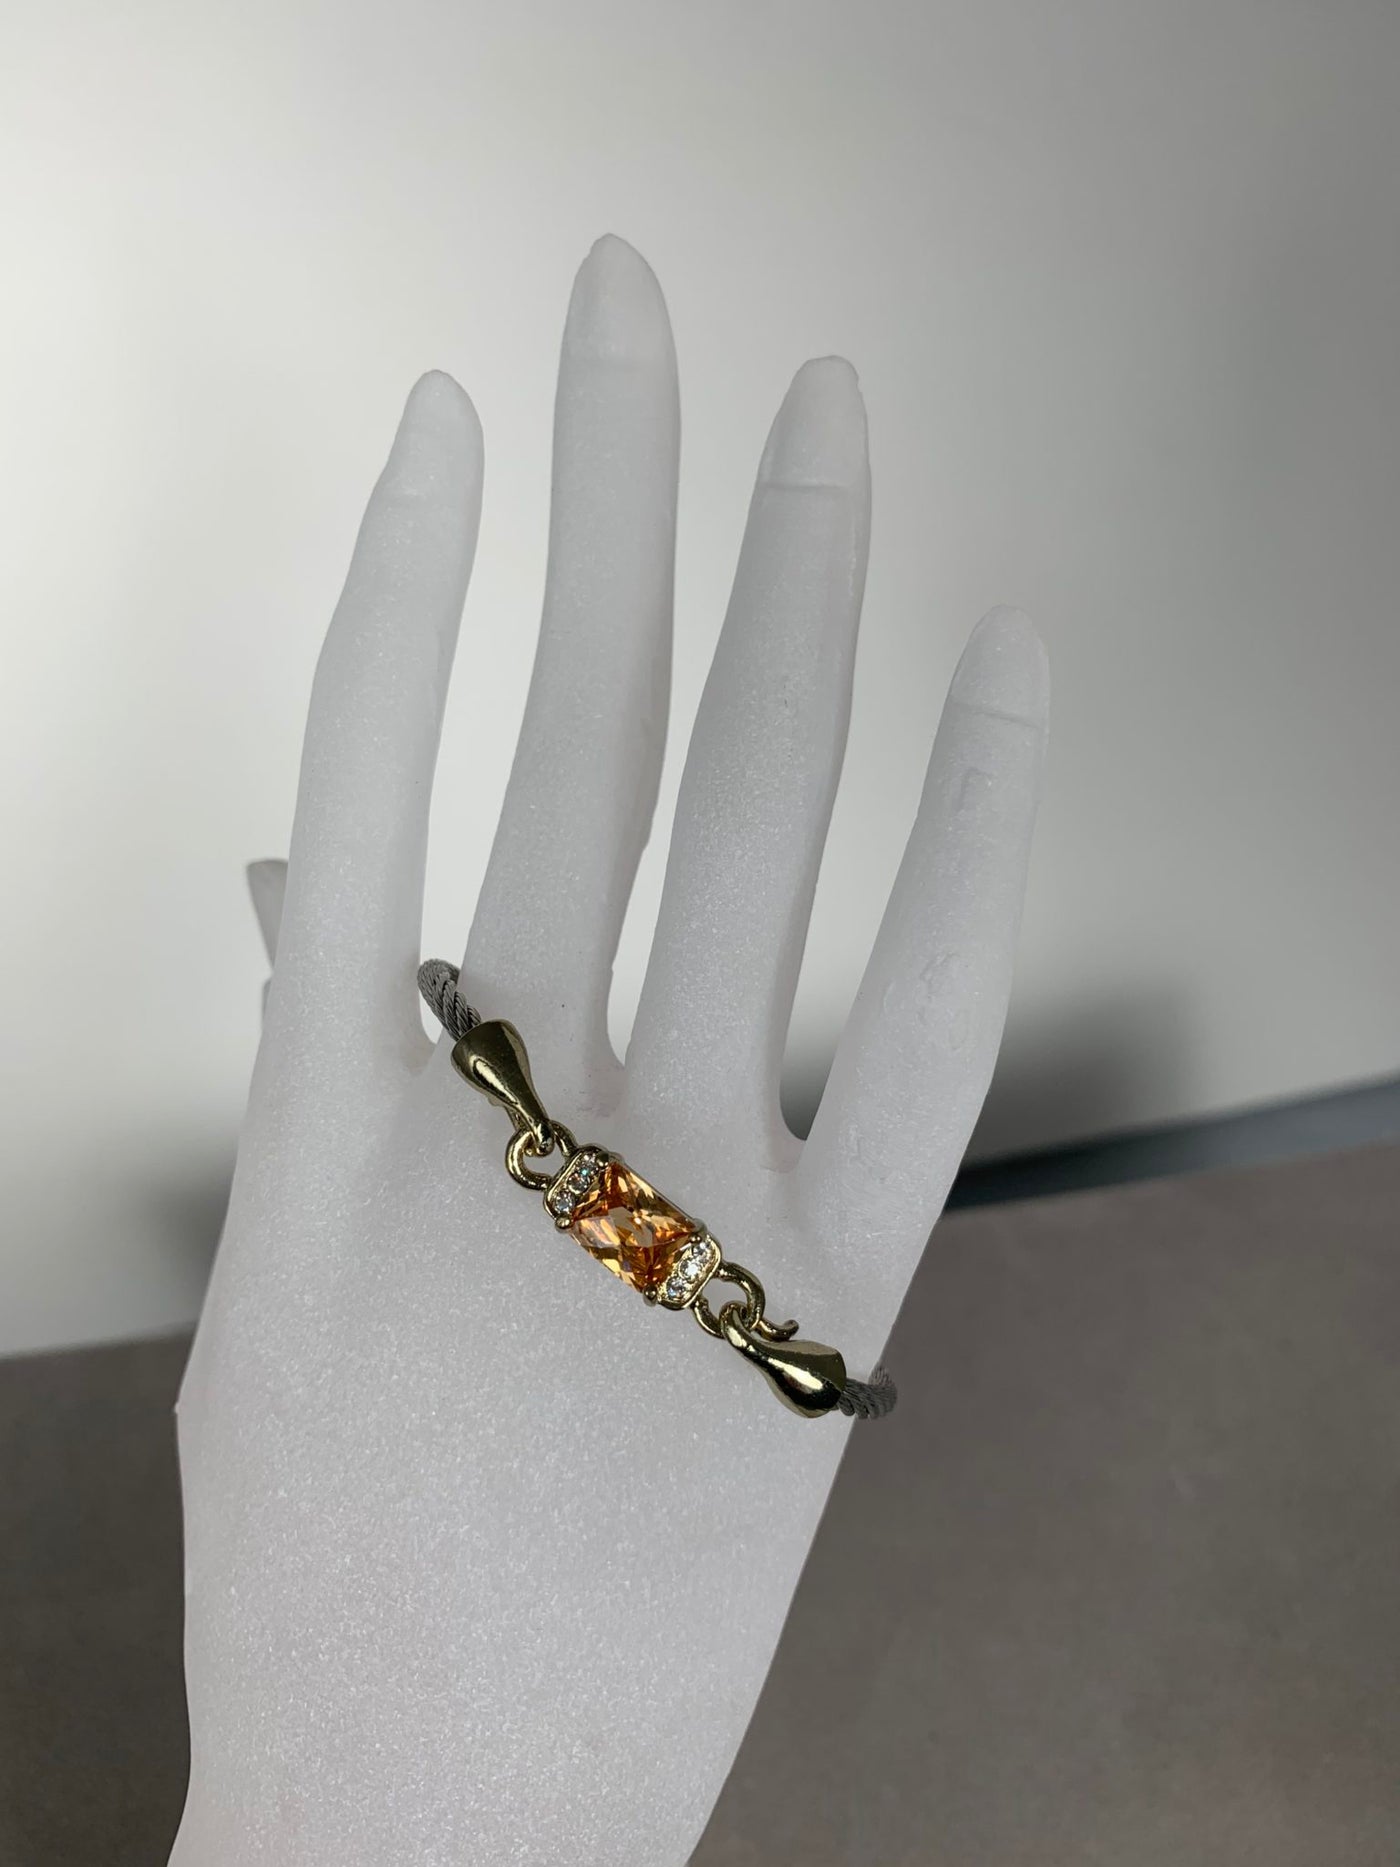 Silver Tone Wire Bangle Bracelet featuring Amber Yellow Crystal